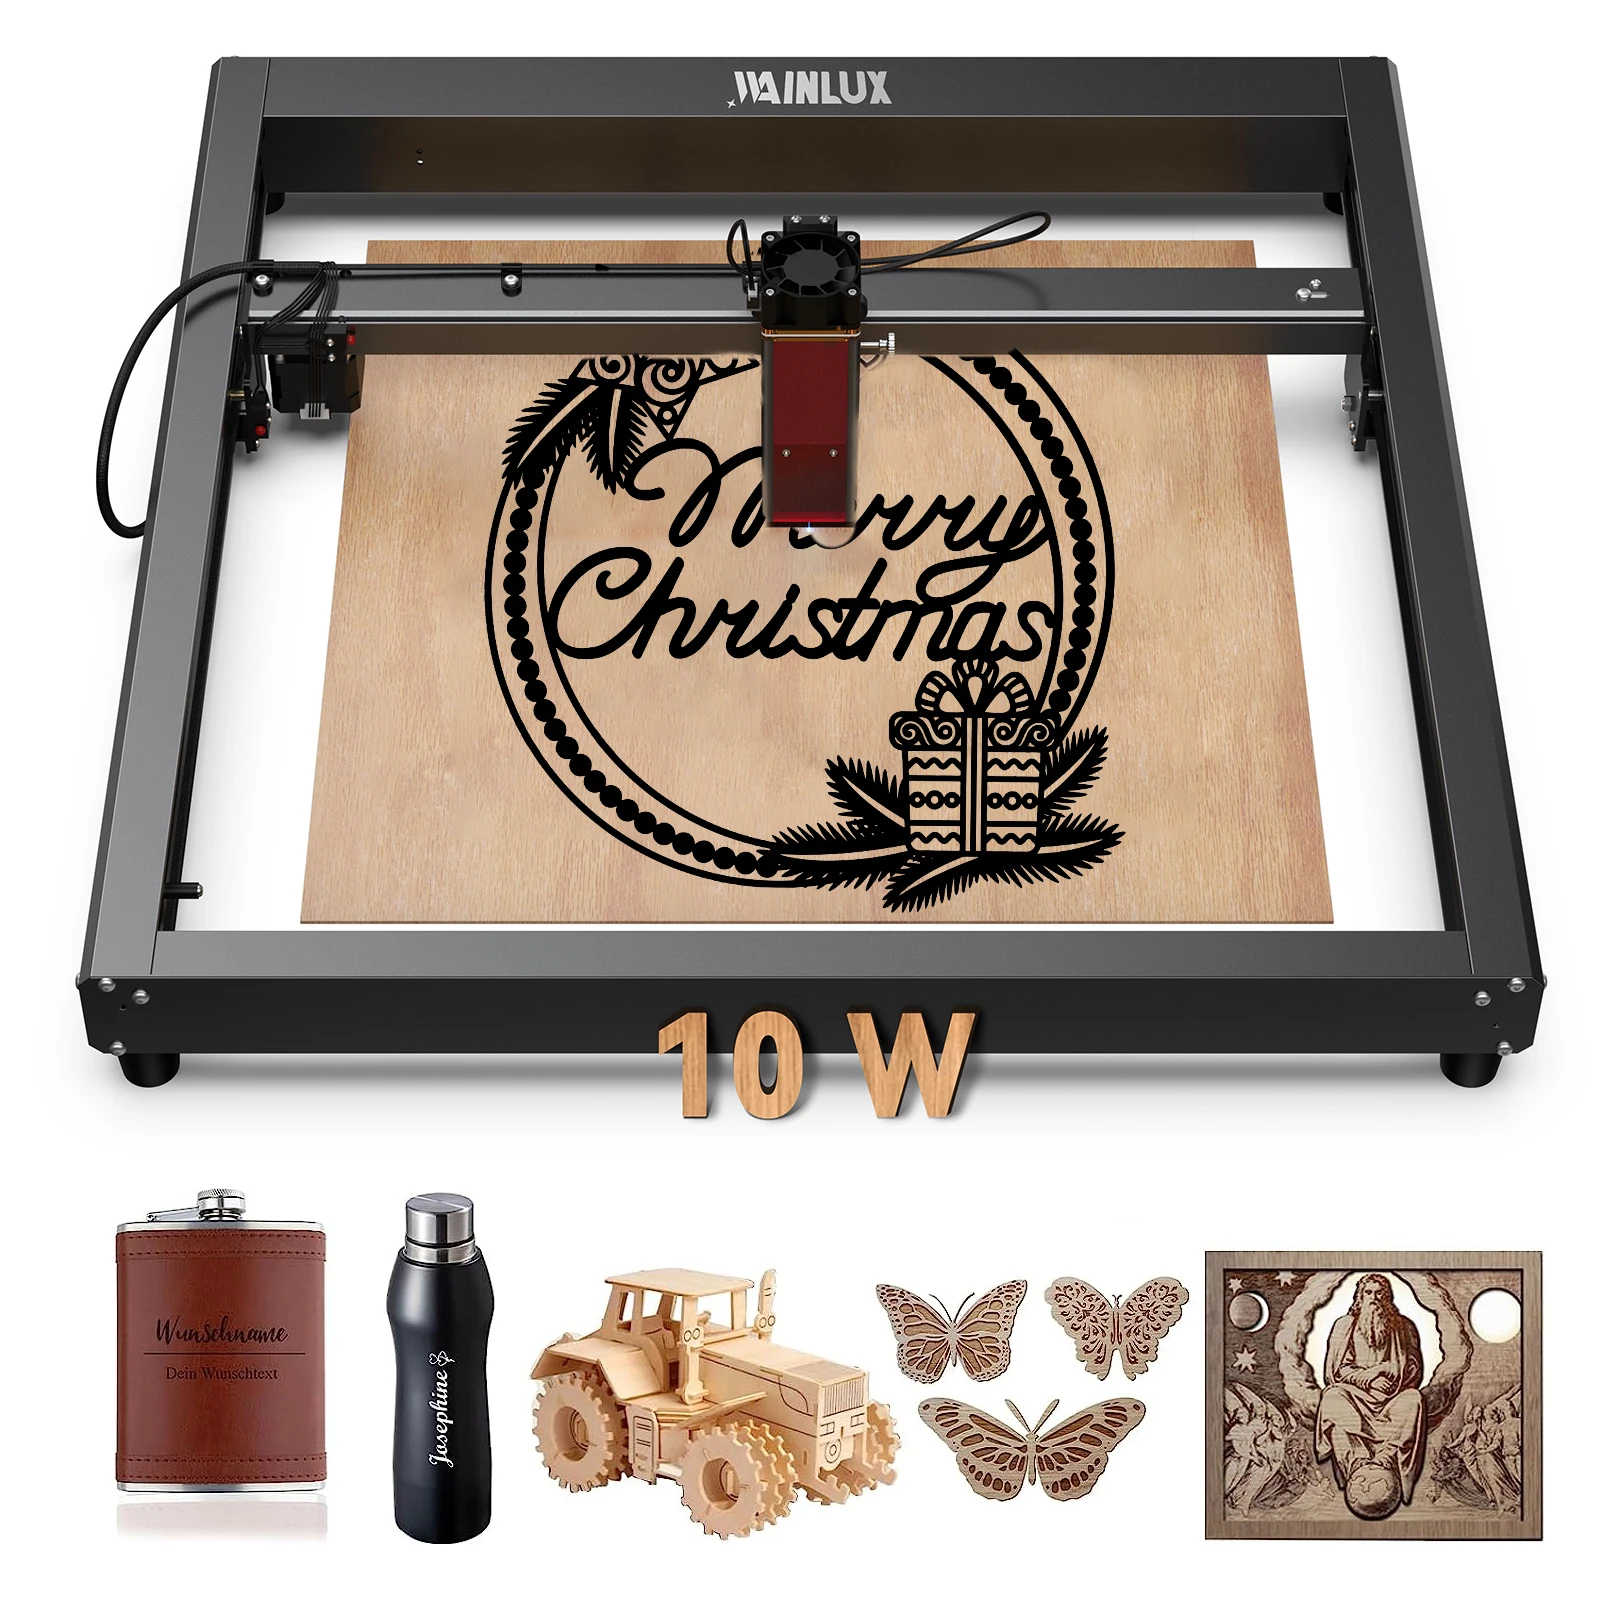 

WAINLUX JL7 Laser Engraving Machine Higher Accuracy 10W Laser Output Engraver Area 400*400mm CNC For Metal/Wood/Glass et